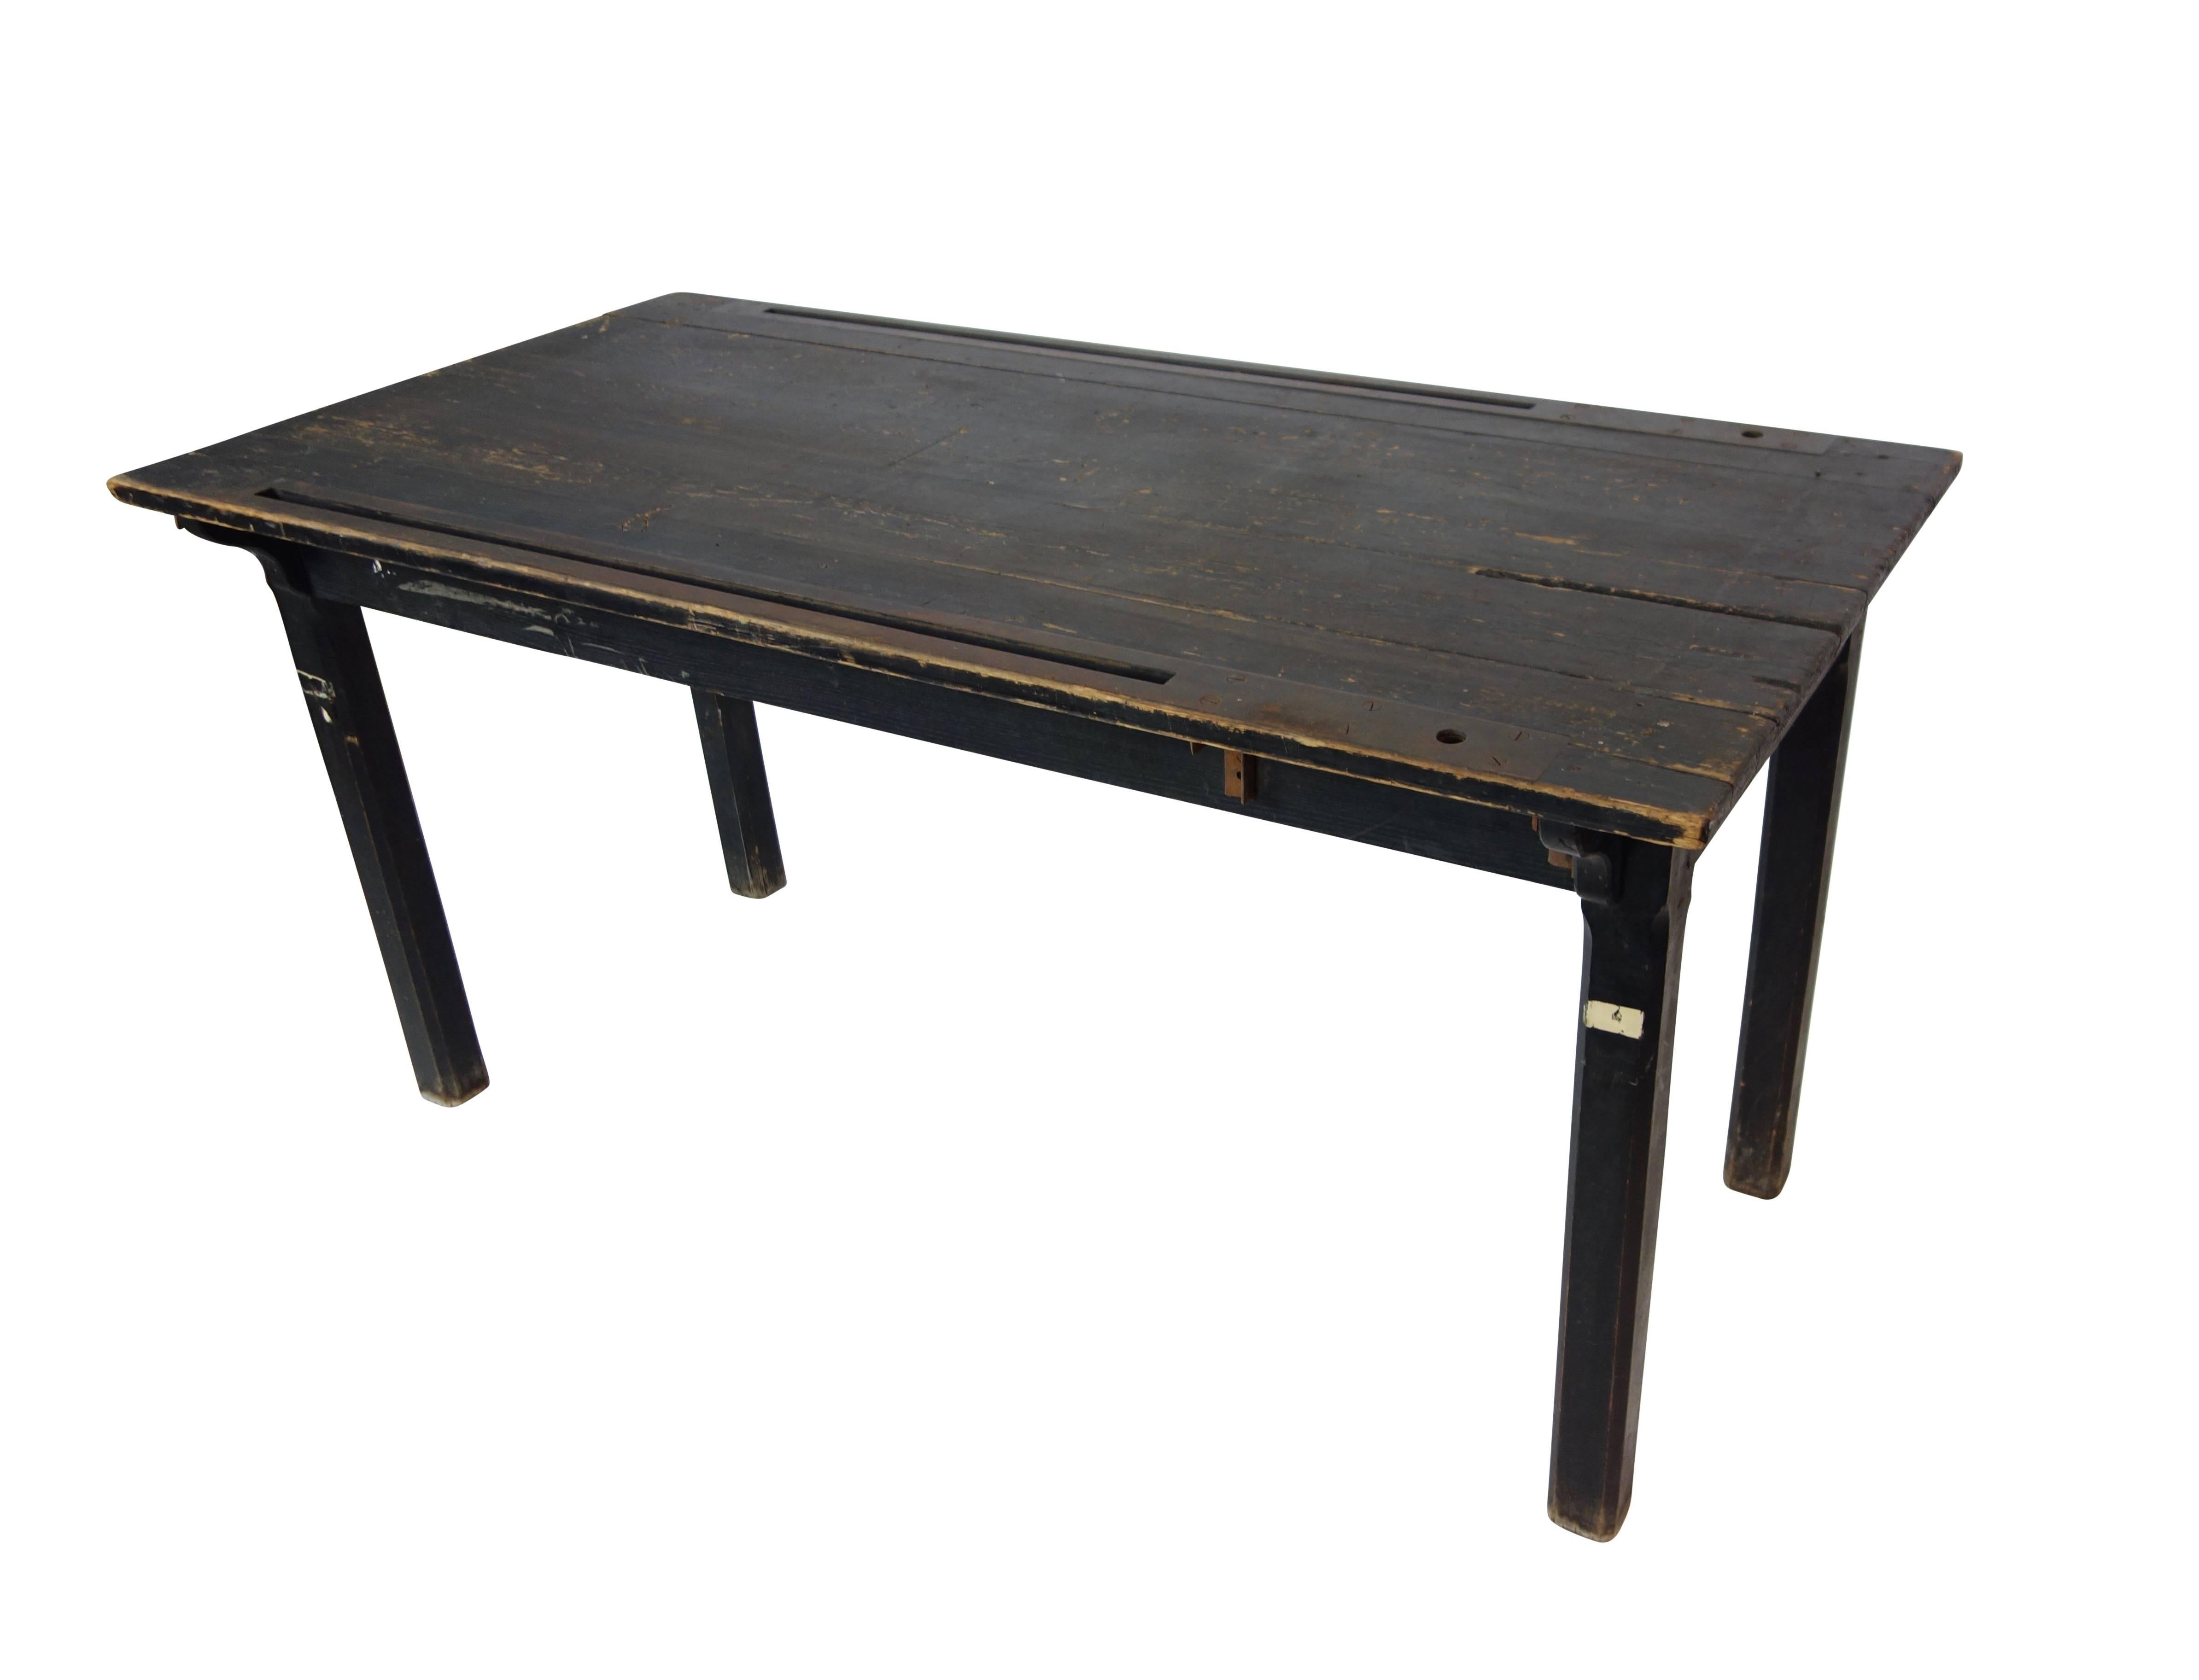 This is an early 20th century black painted Industrial wood dining table. The tabletop has two iron tracks that run lengthwise along the edge on either side of the table. Its original use is unknown, but this was once some kind of work table.